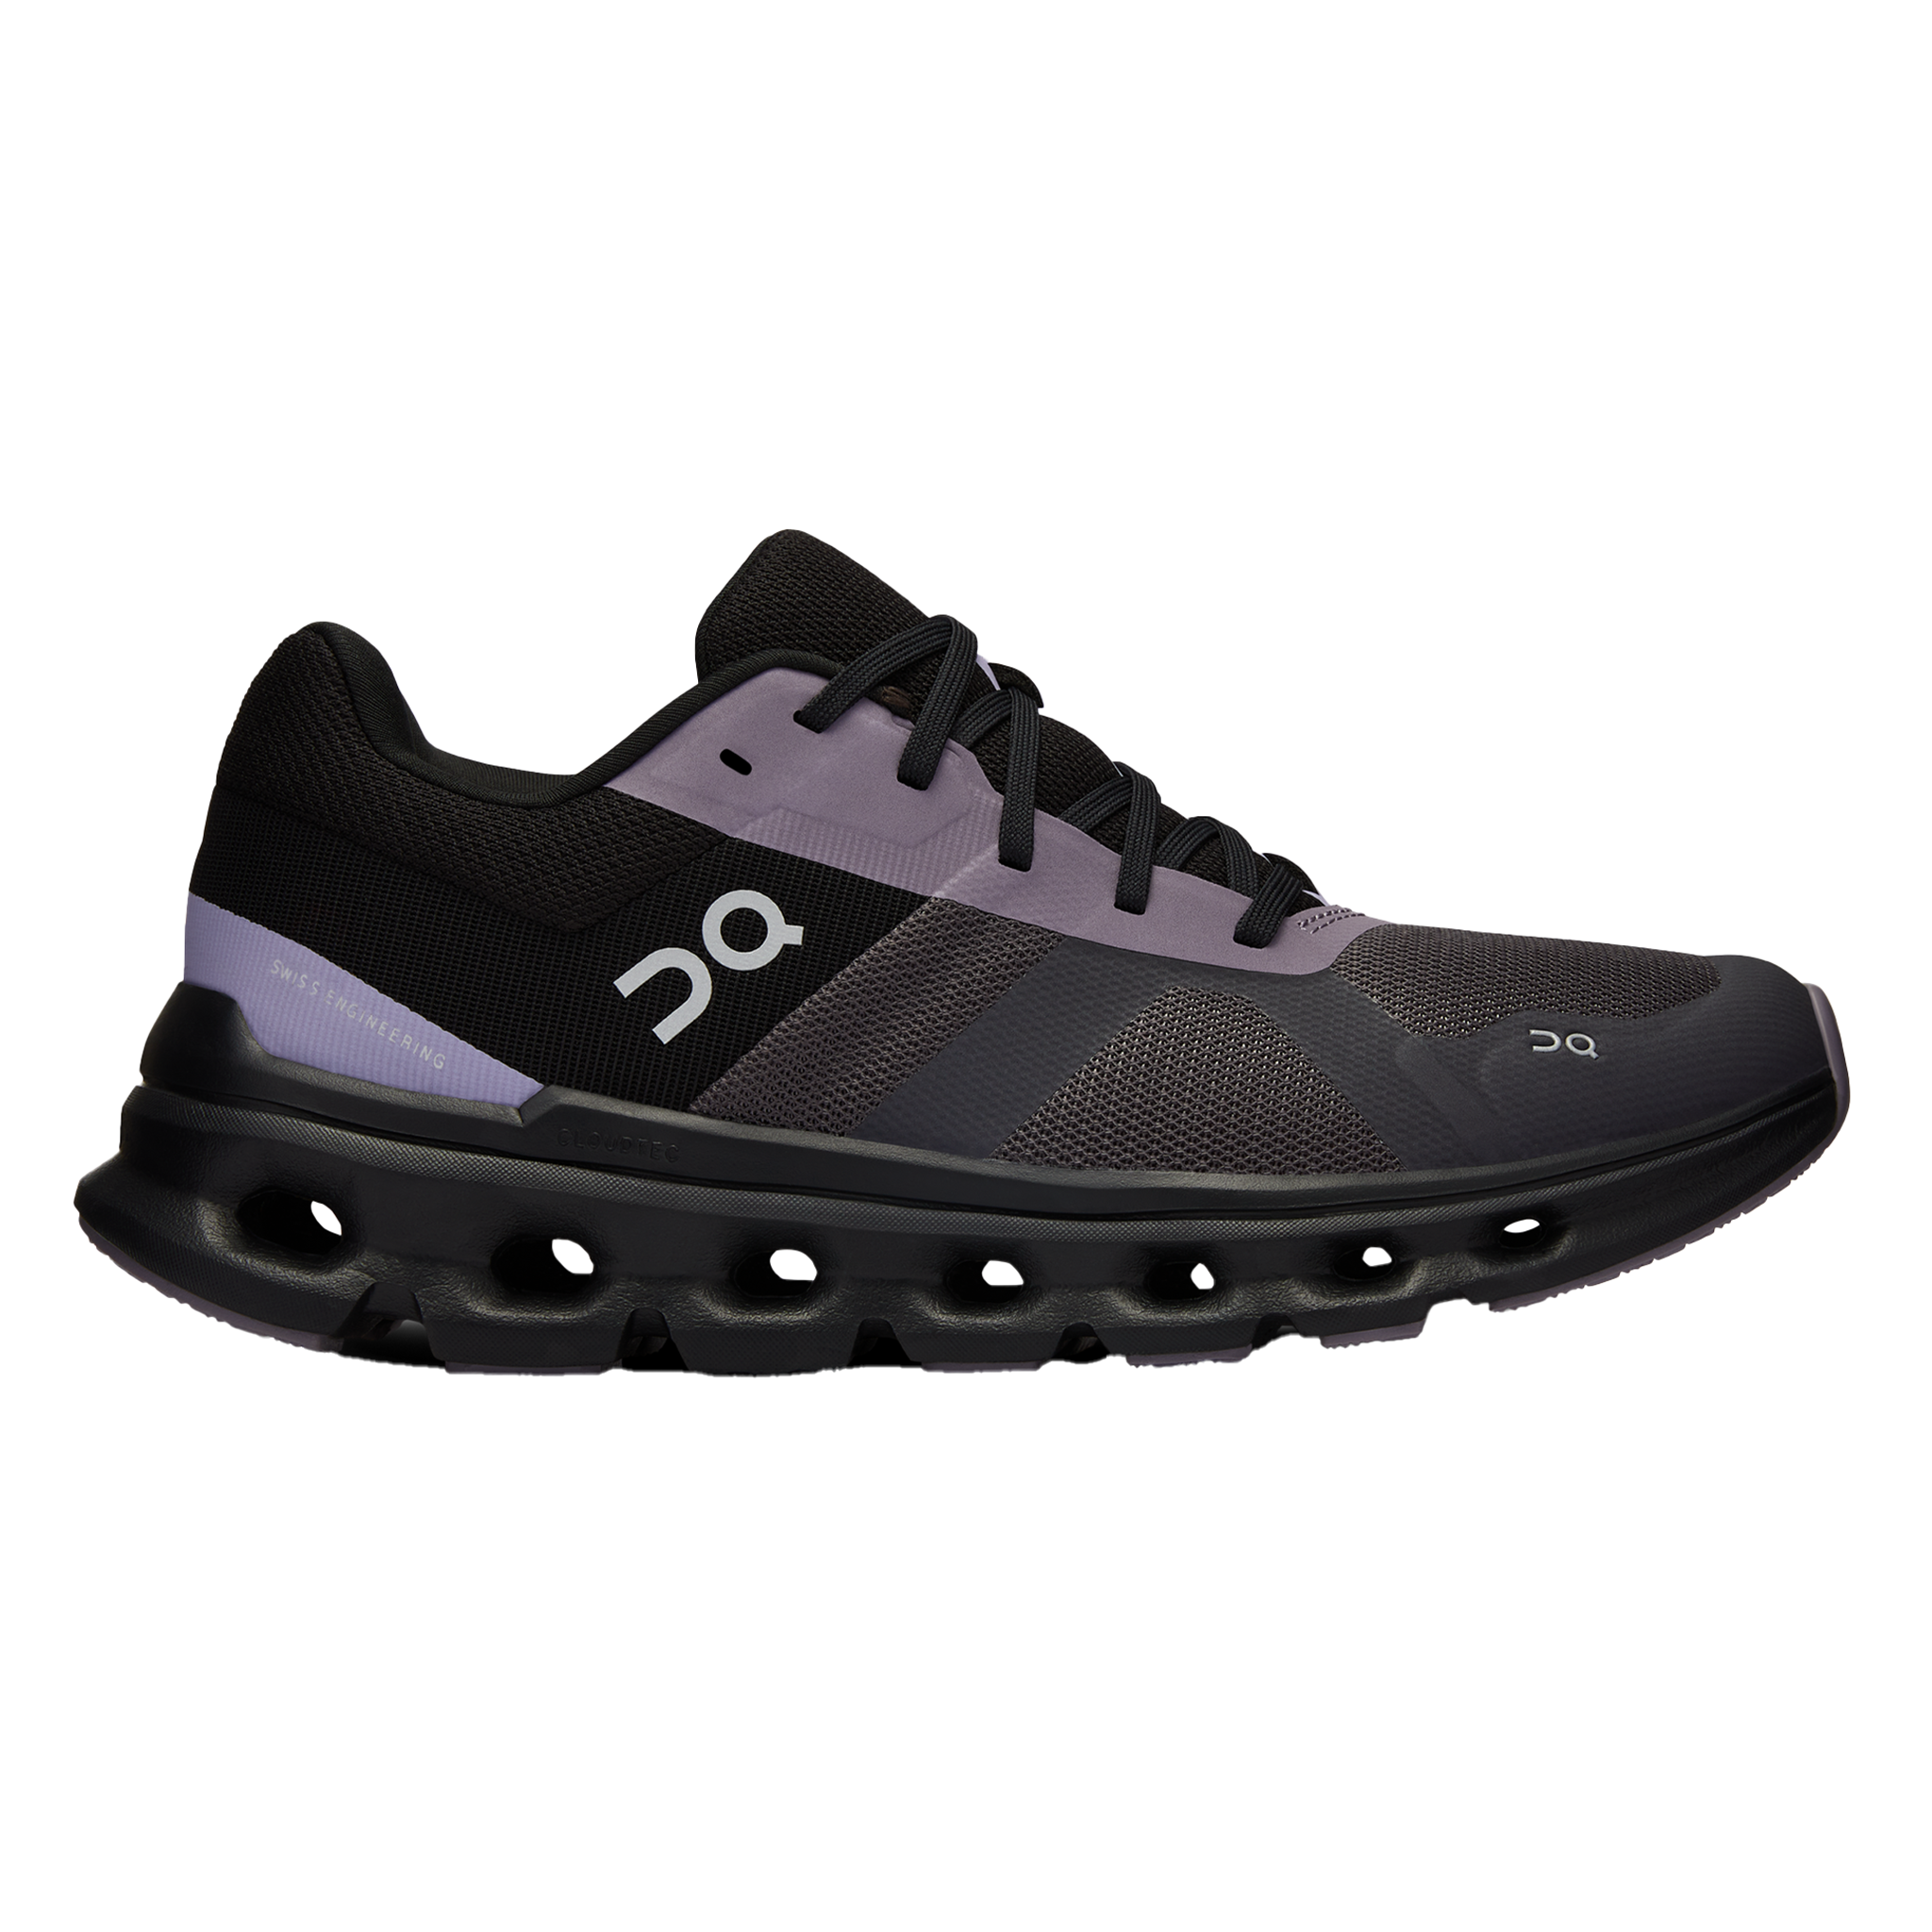 ON Womens Cloudrunner - Iron/Black - Stability